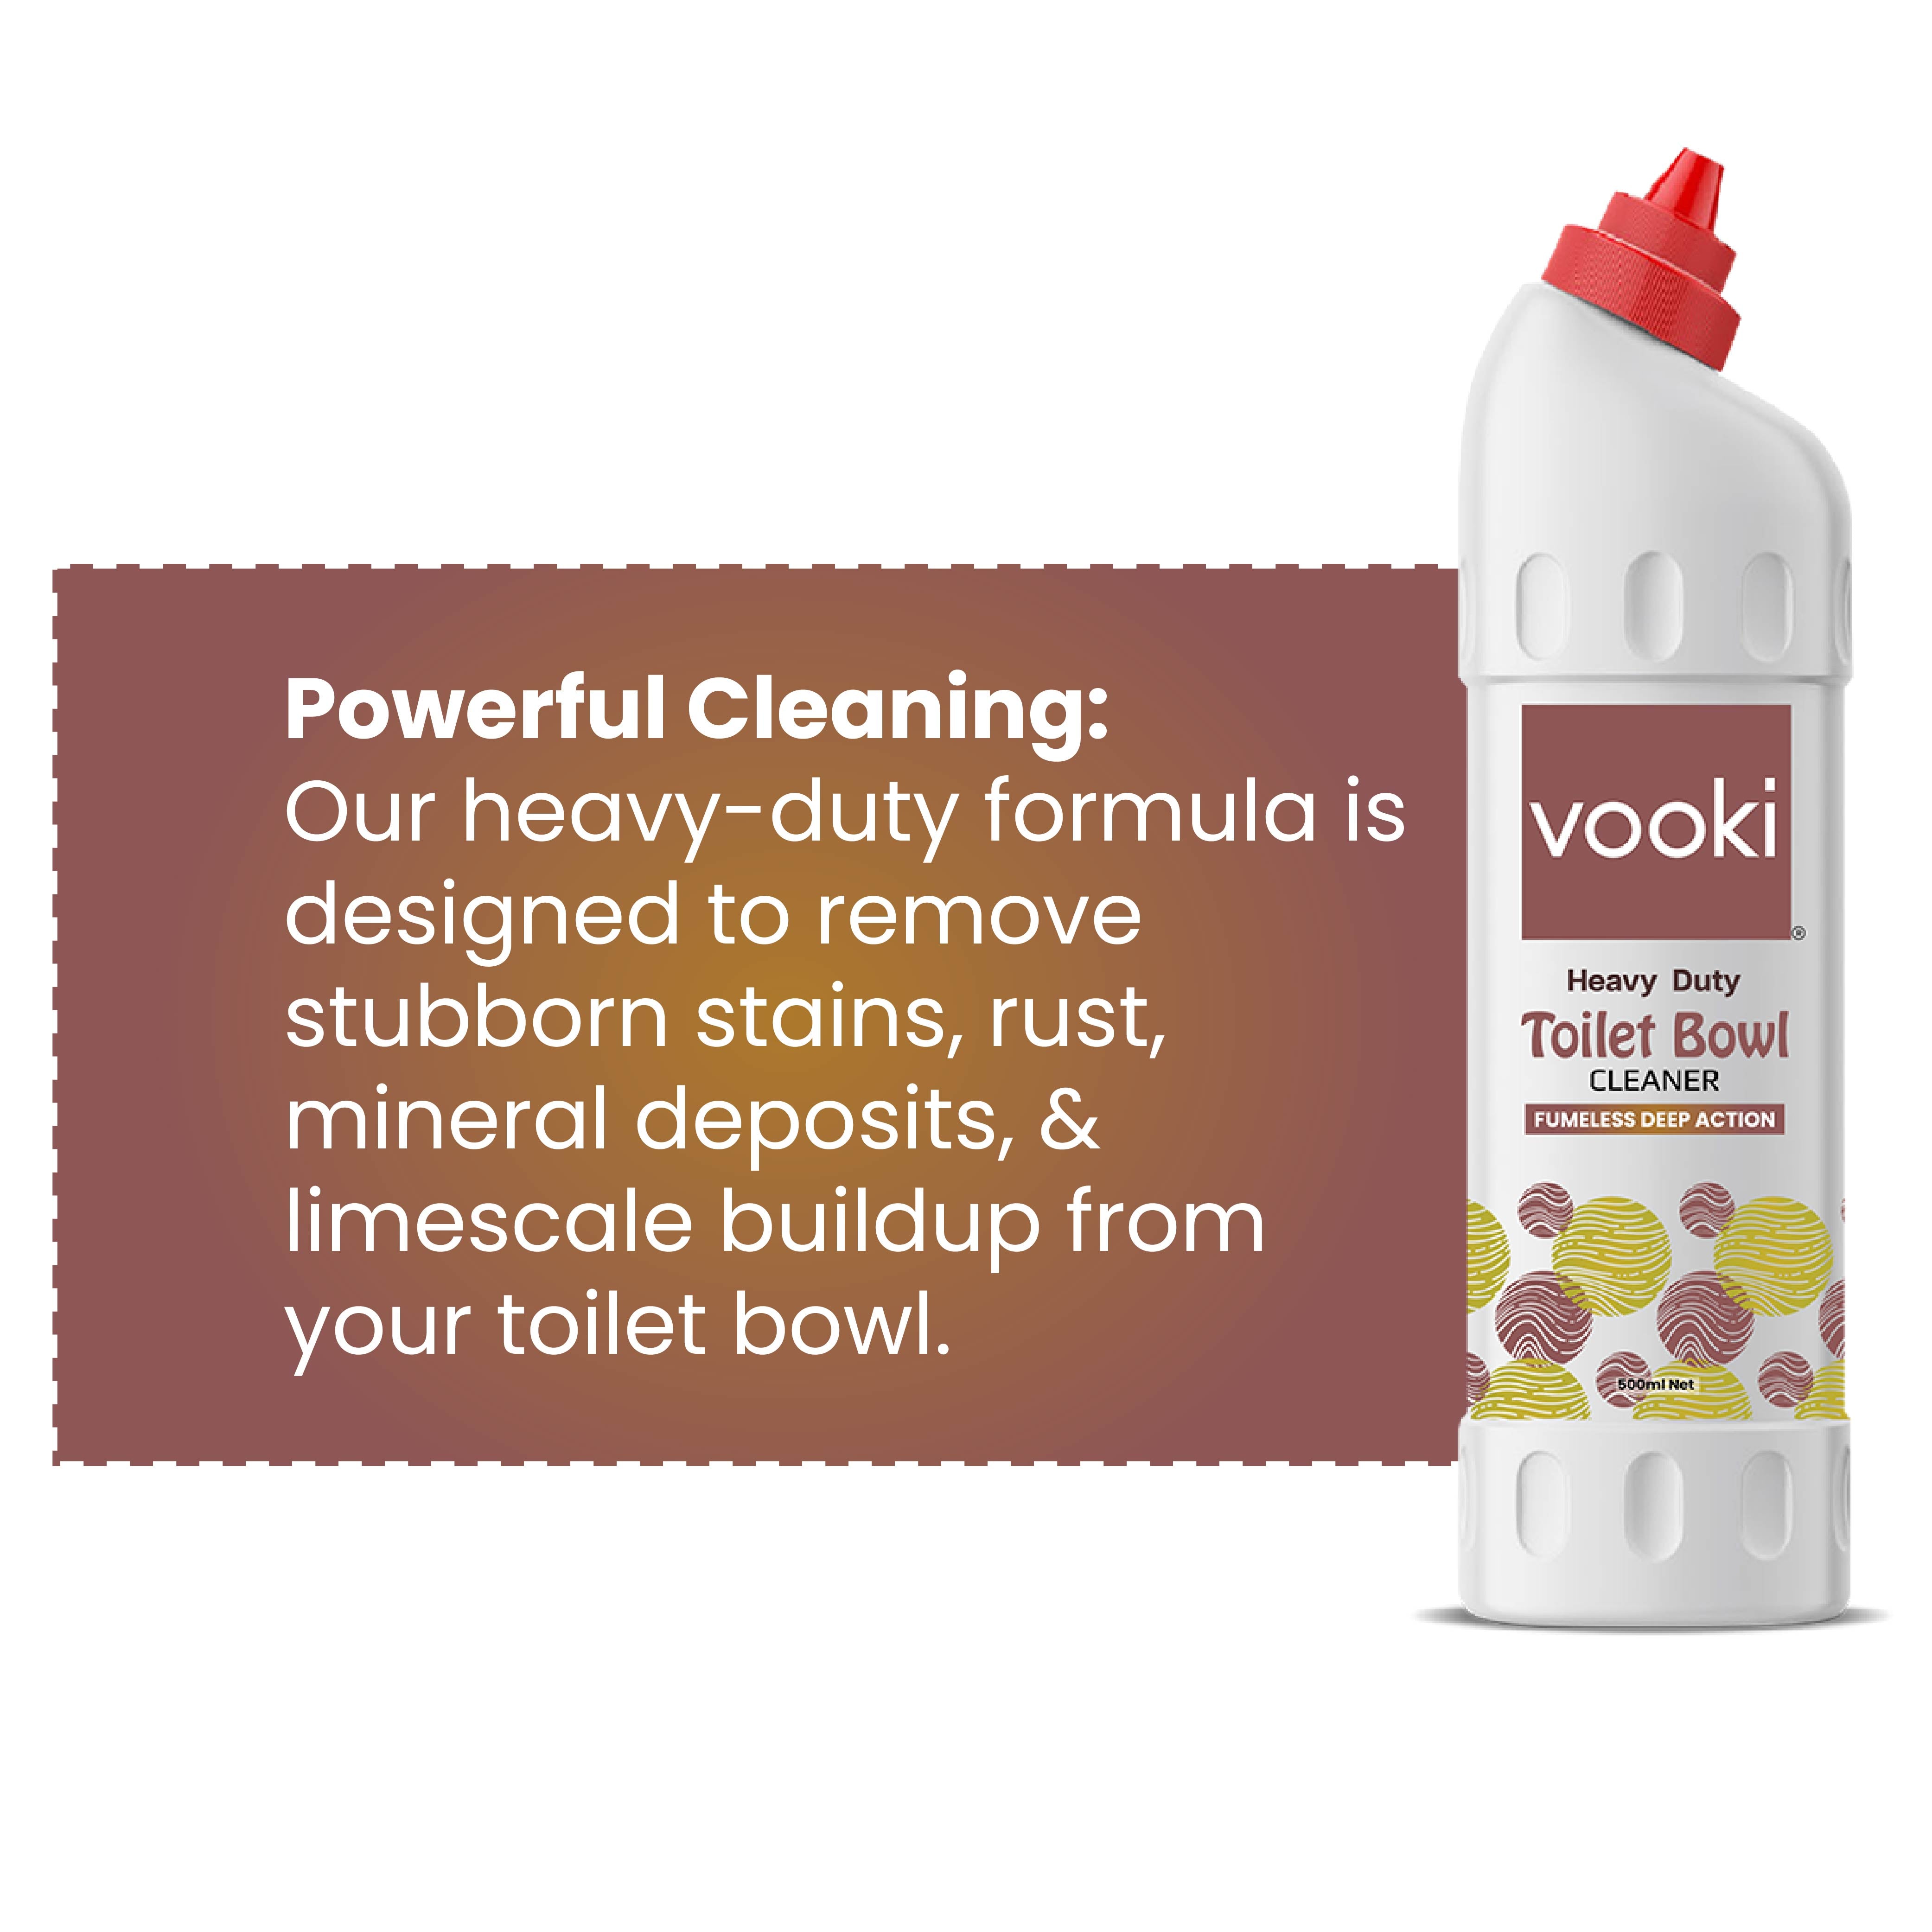 Keep your toilet clean with vooki toilet bowl cleaner-effective and easy to use.